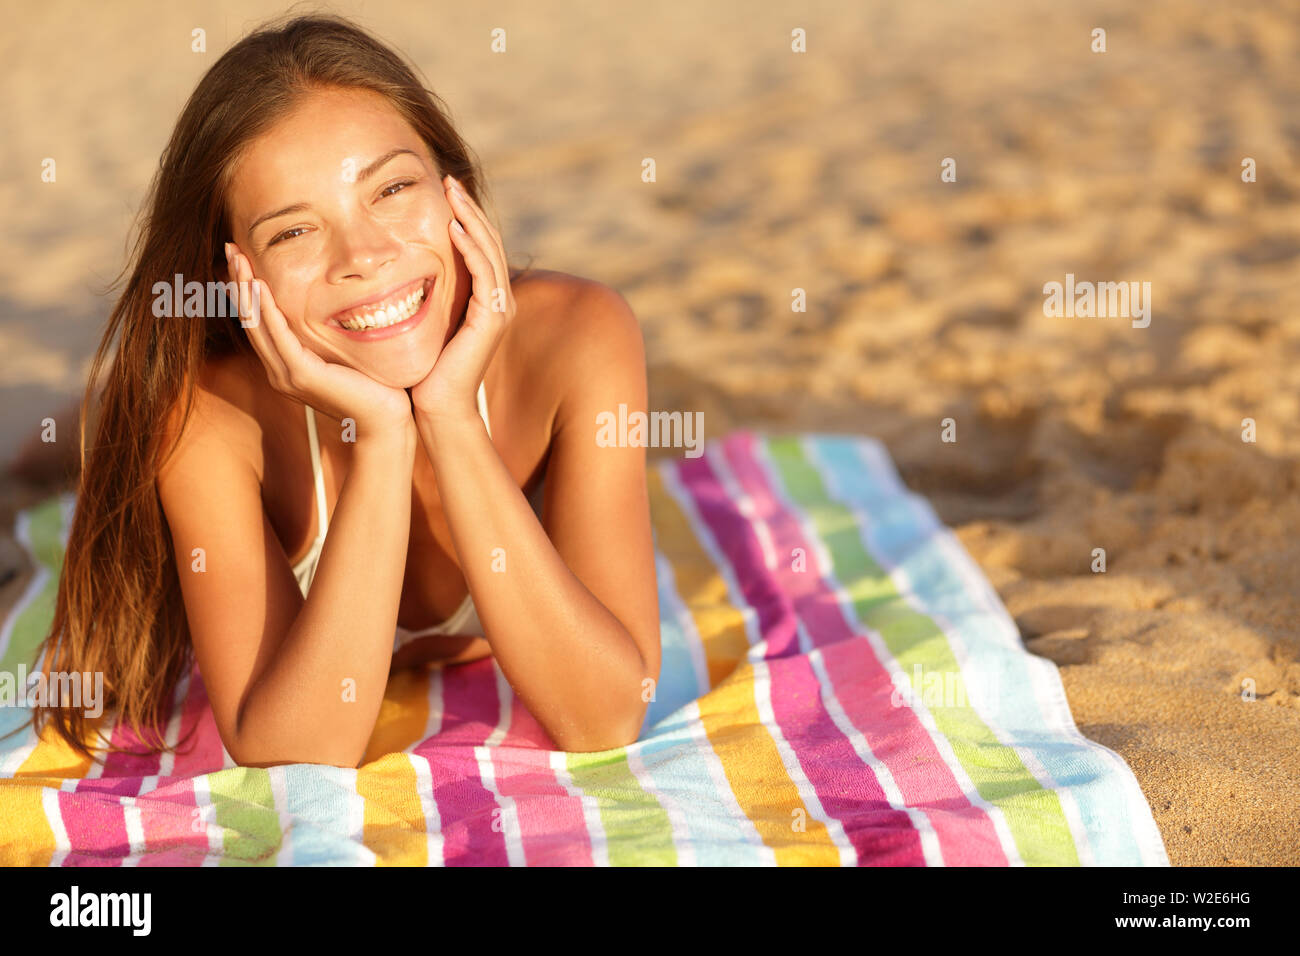 Beautiful woman sunbathing on the beach lying on a towel facing the camera with her chin cupped in her hands and a lovely vivacious smile on her face. Multicultural candid girl outside. Stock Photo